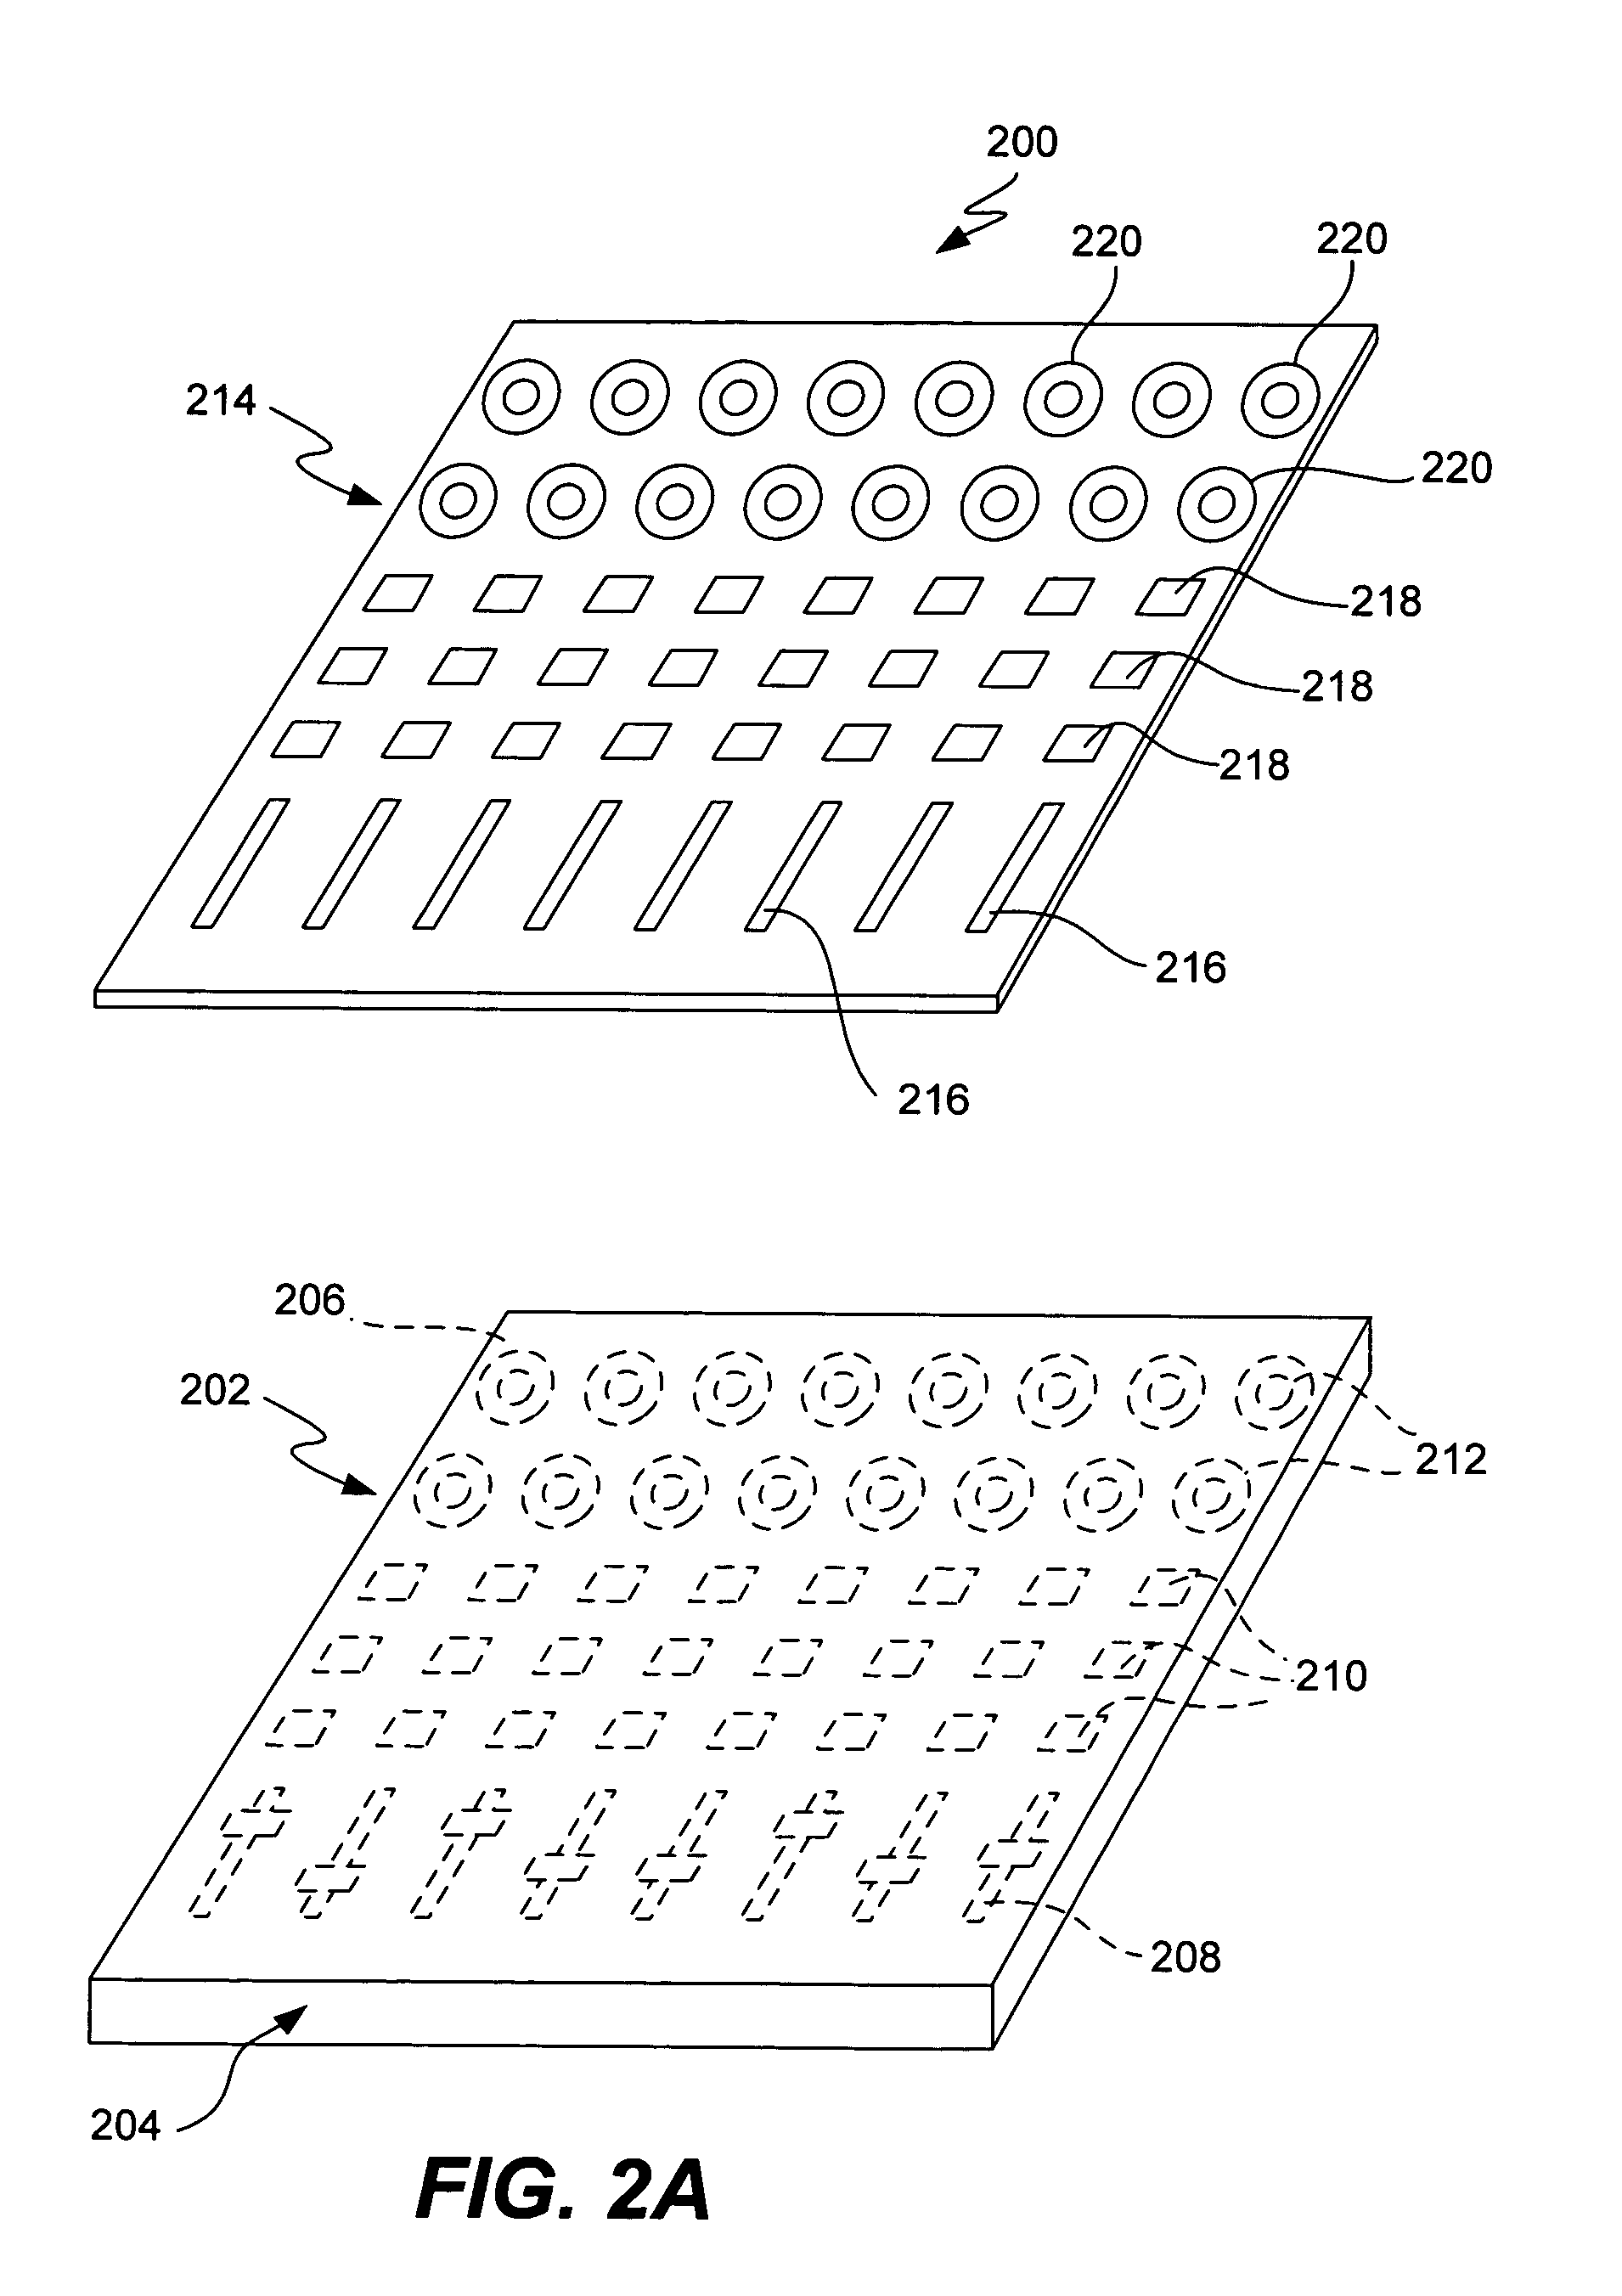 Touch-sensitive electronic apparatus for media applications, and methods therefor